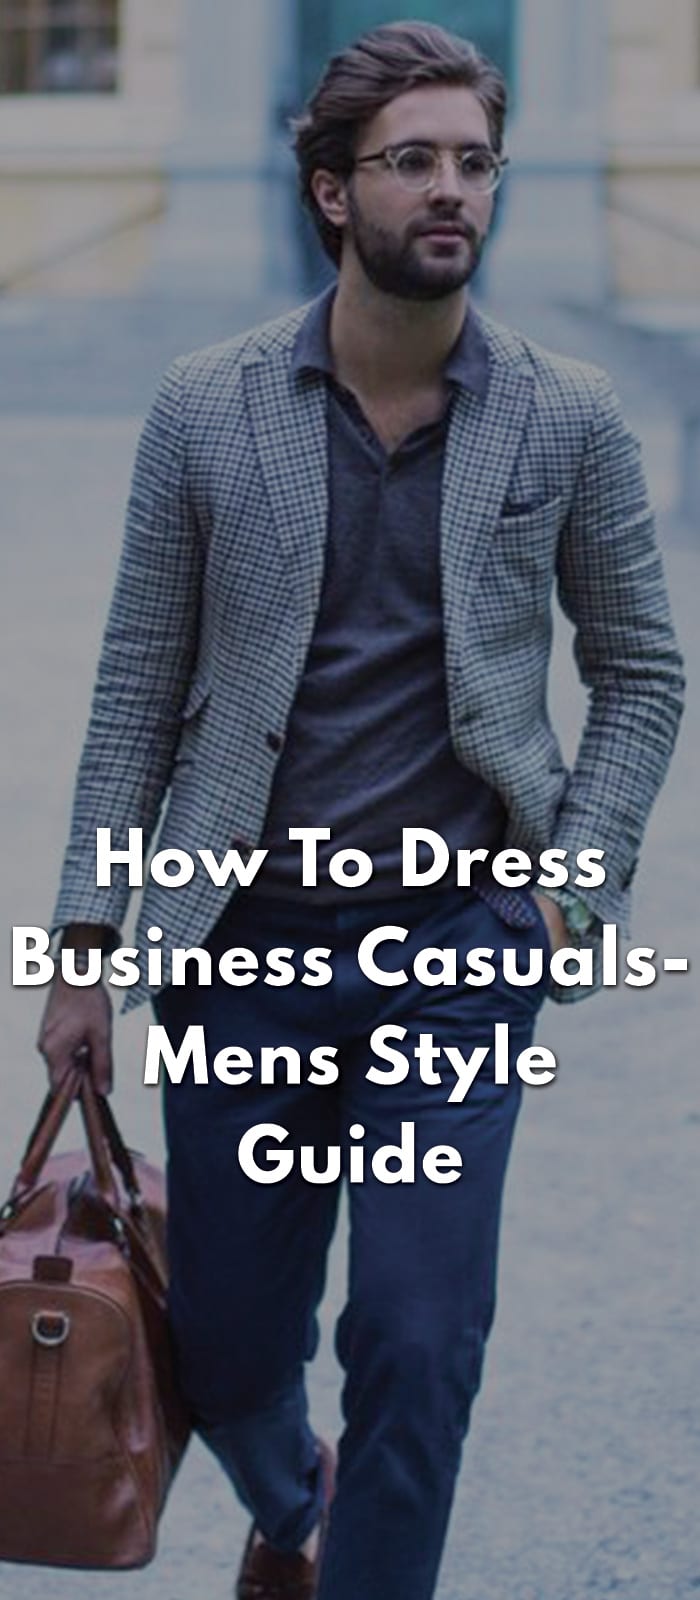 How-To-Dress-Business-Casuals--Mens-Style-GUide